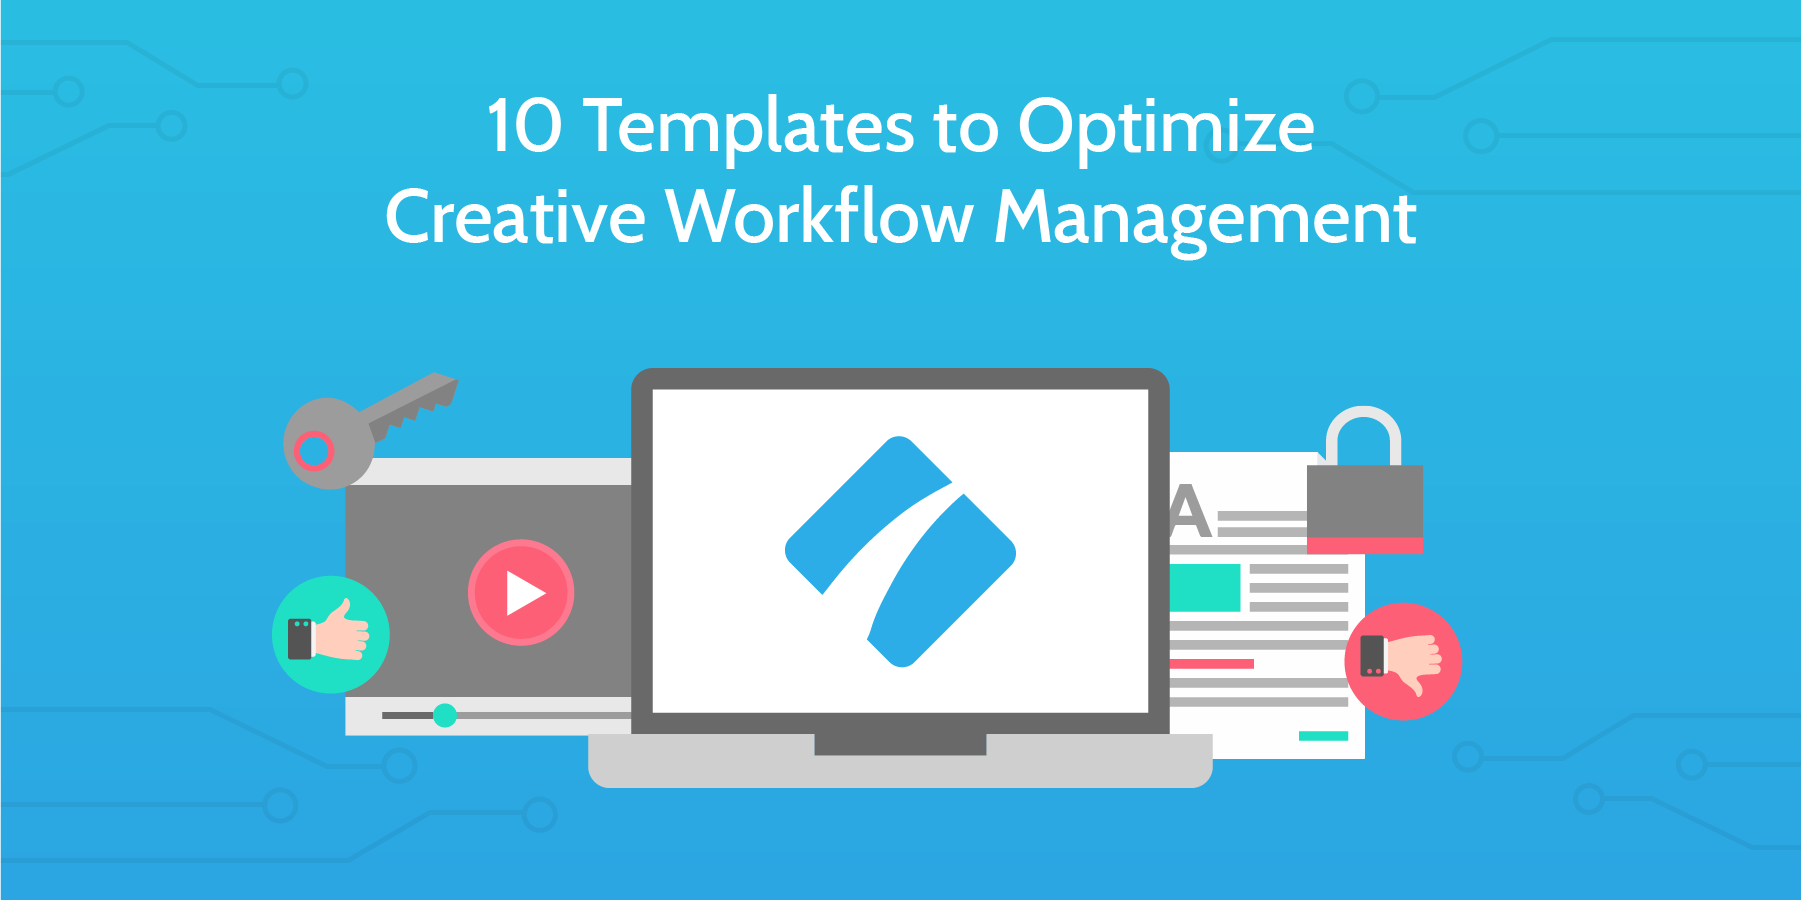 10 Templates to Optimize Creative Workflow Management